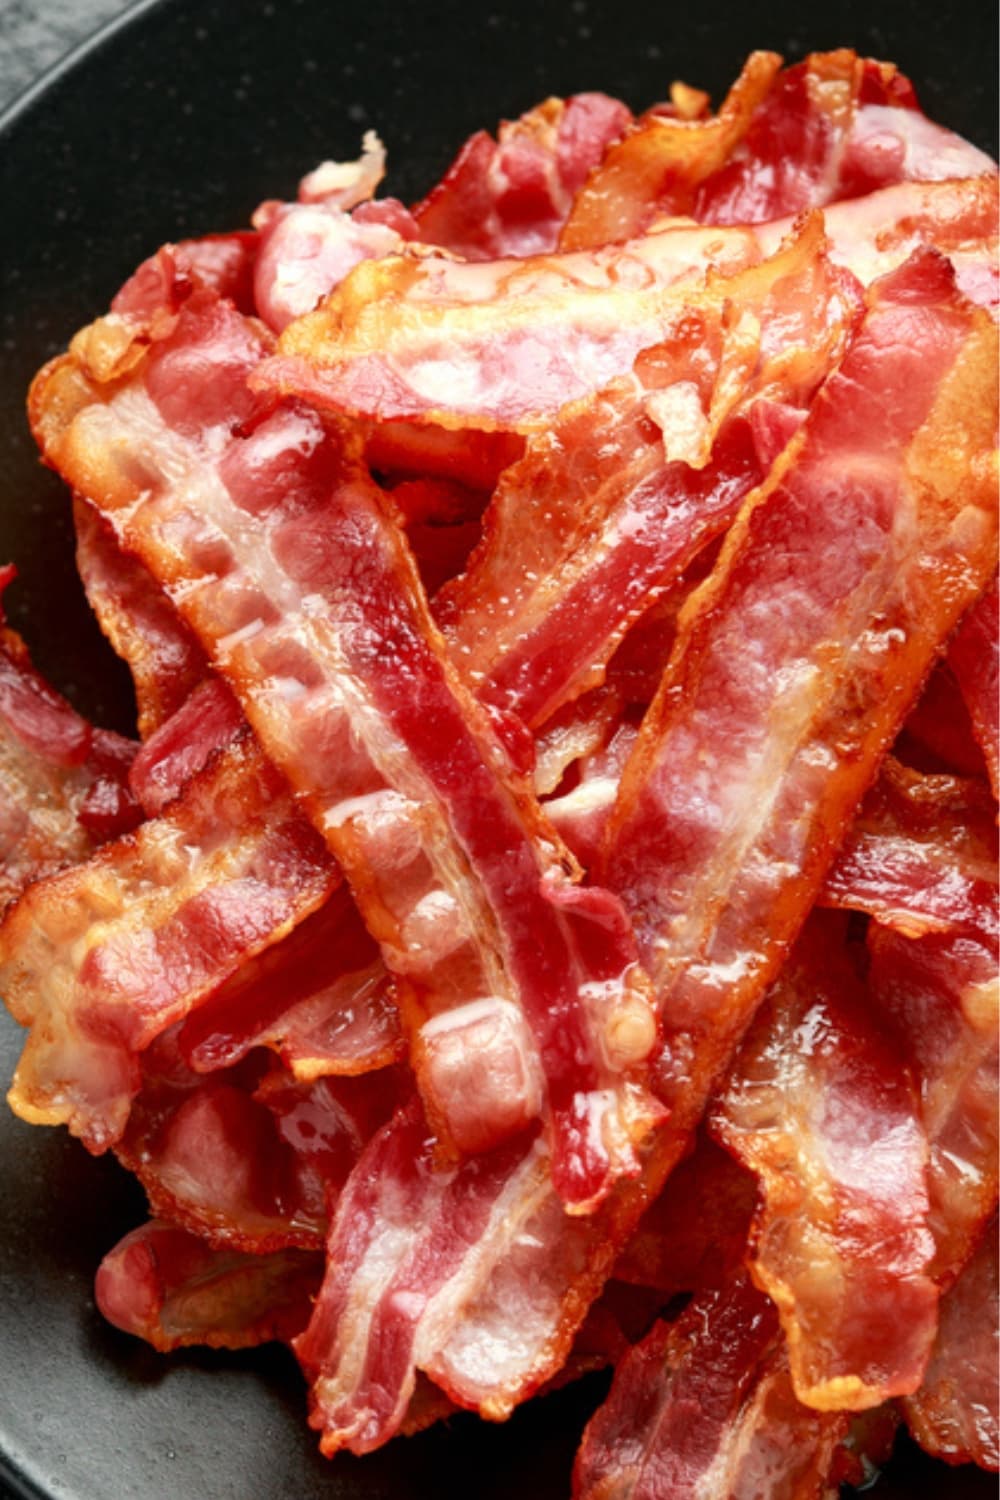 How Long to Bake Bacon at 350 (Easy Recipe) featuring Pile of Baked Bacon Strips